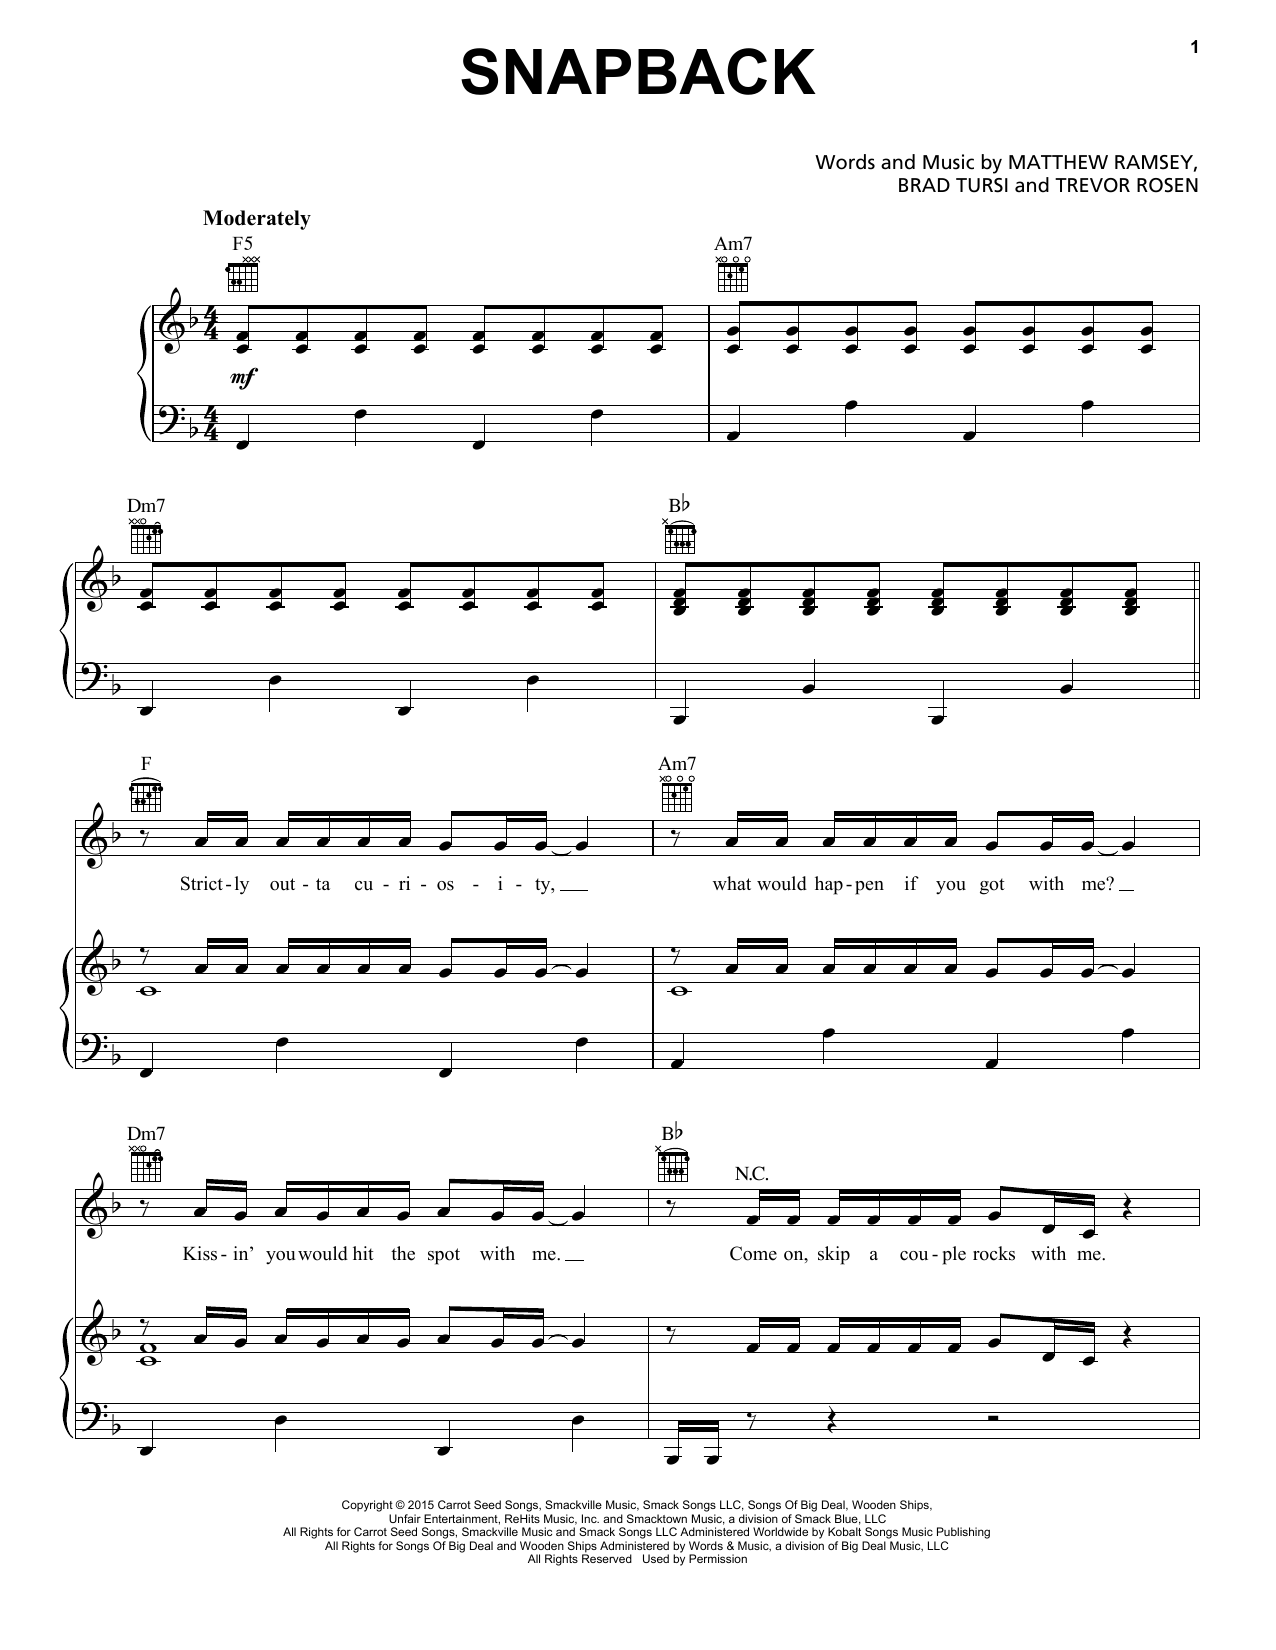 Download Old Dominion Snapback Sheet Music